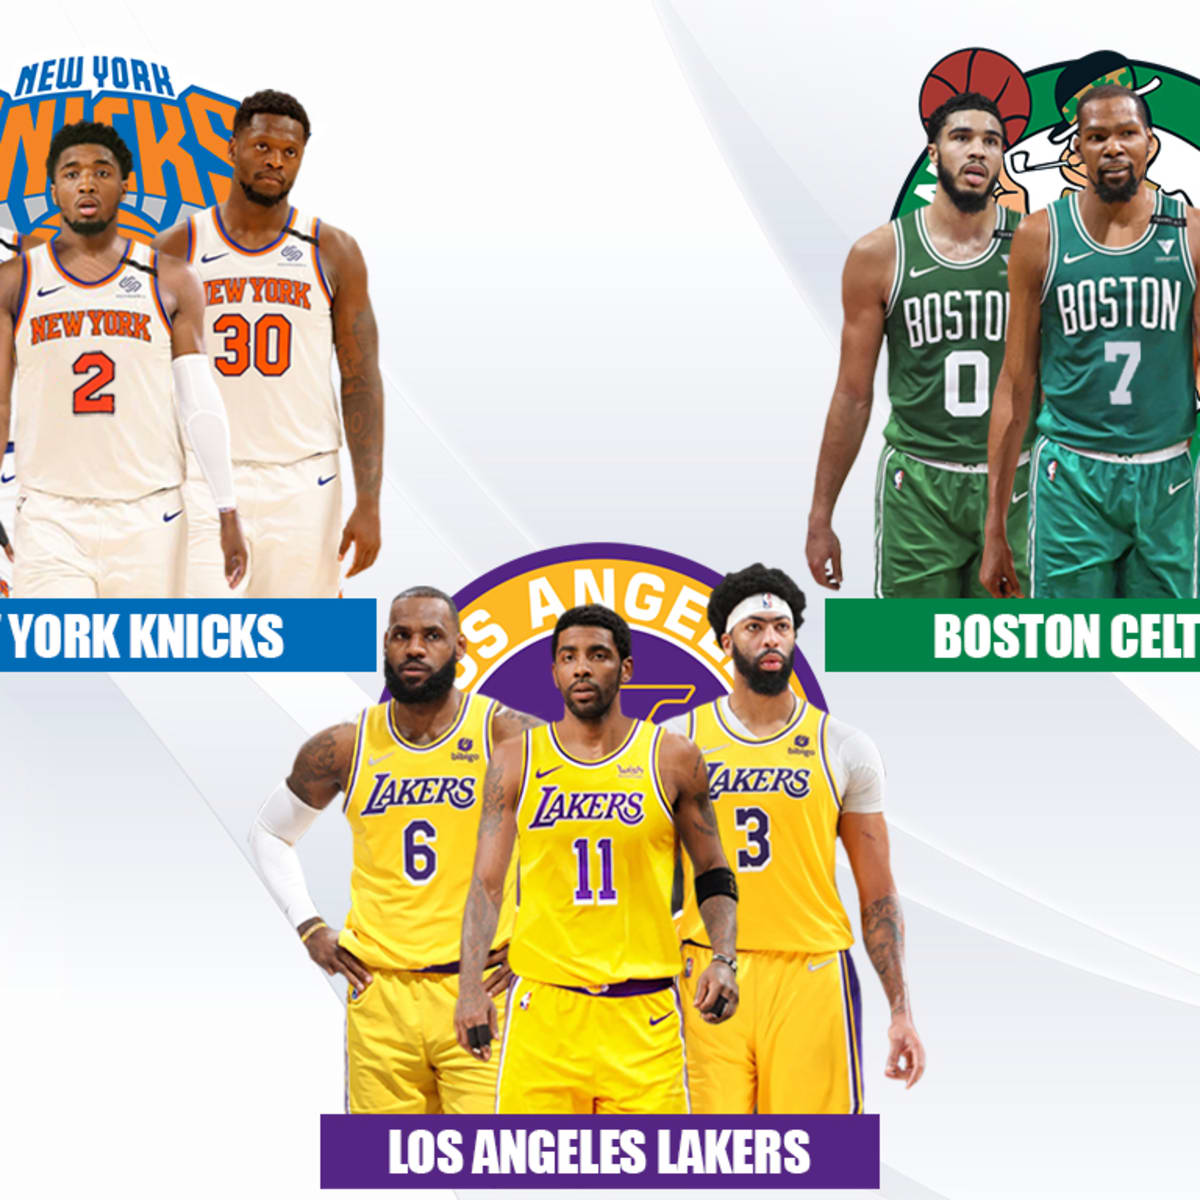 The NBA super teams that could be constructed this summer